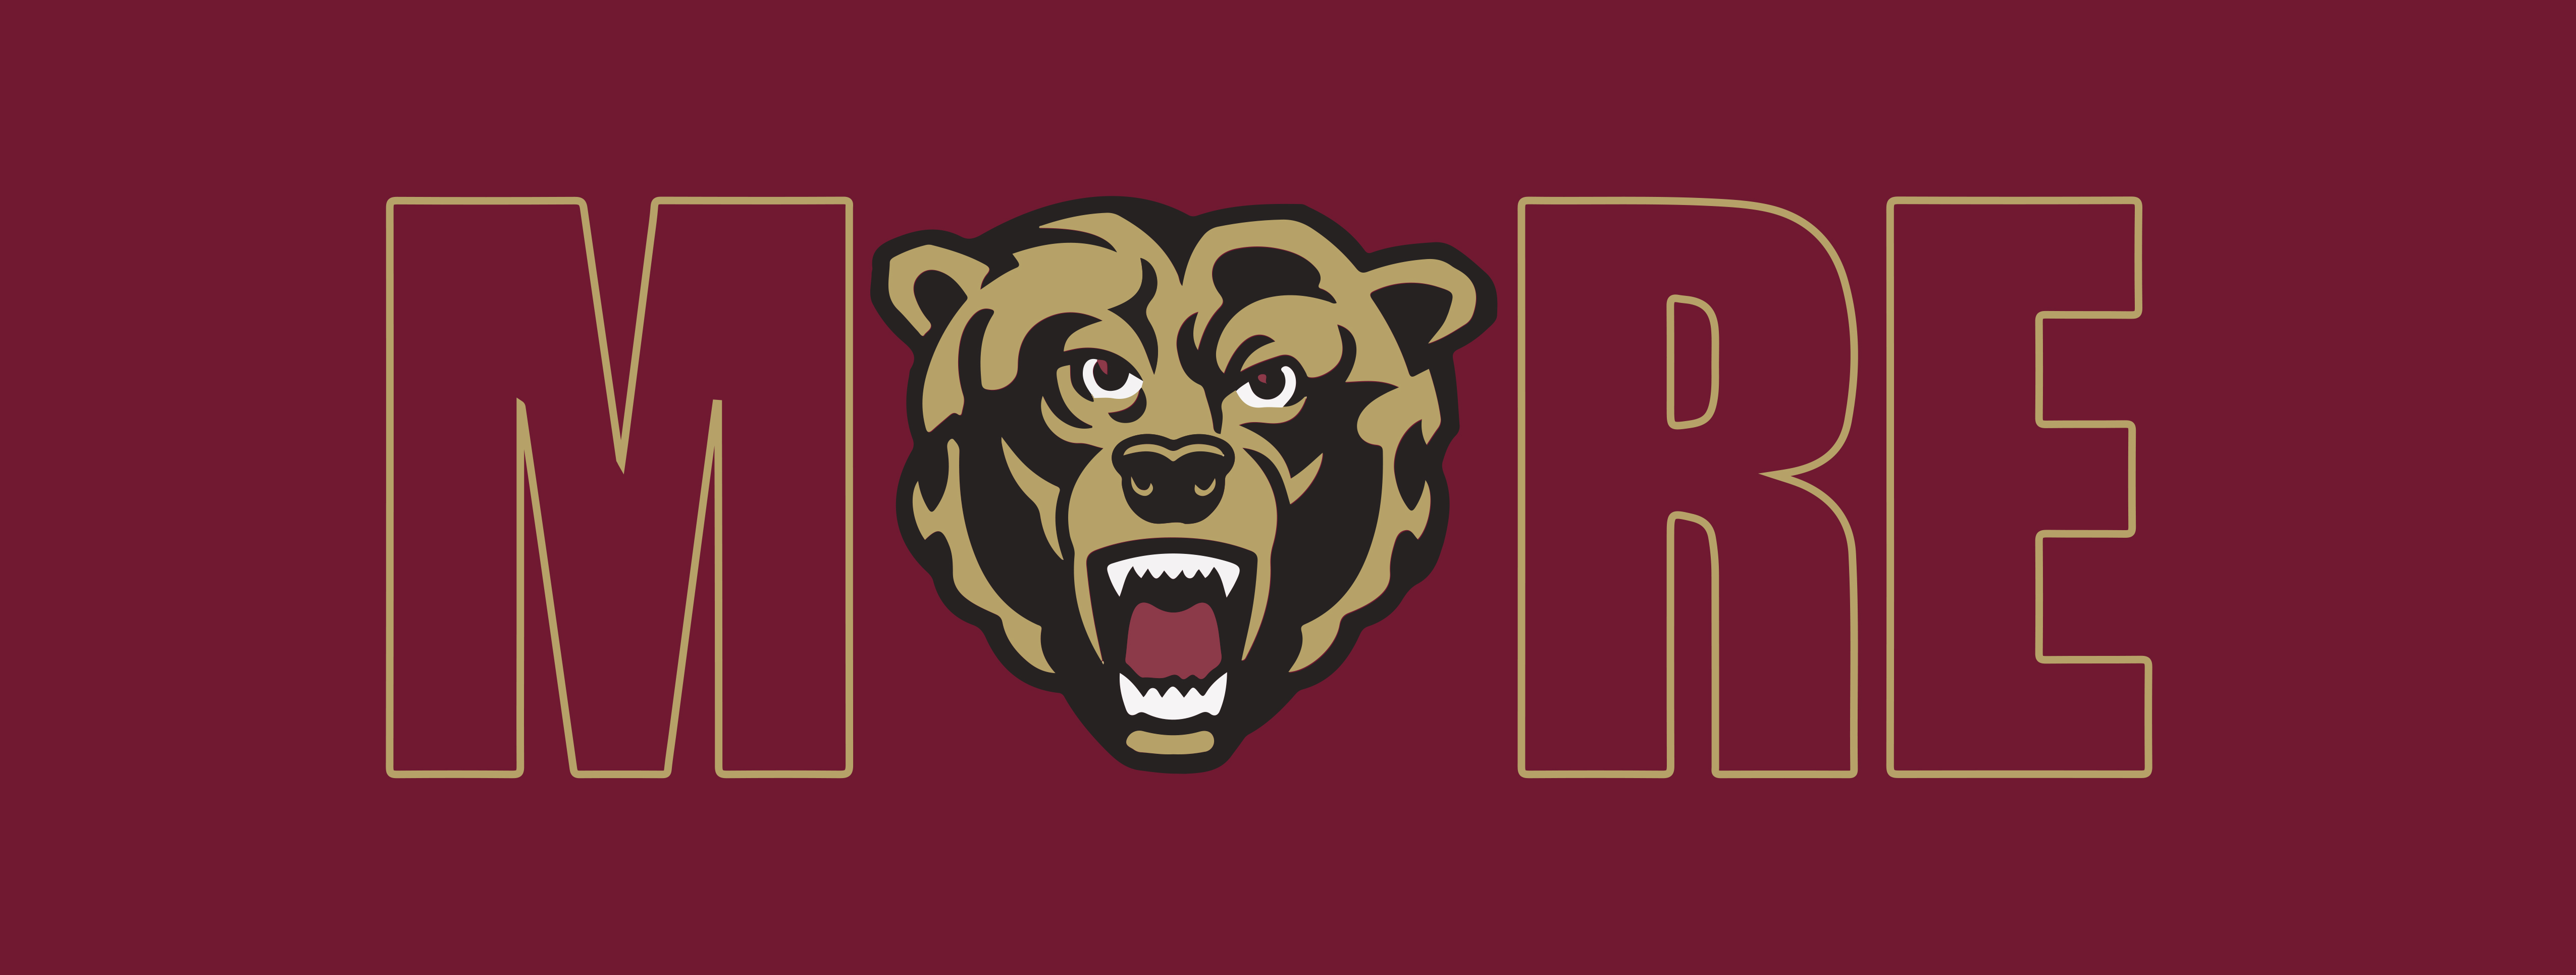 MORE Program Logo on a maroon background